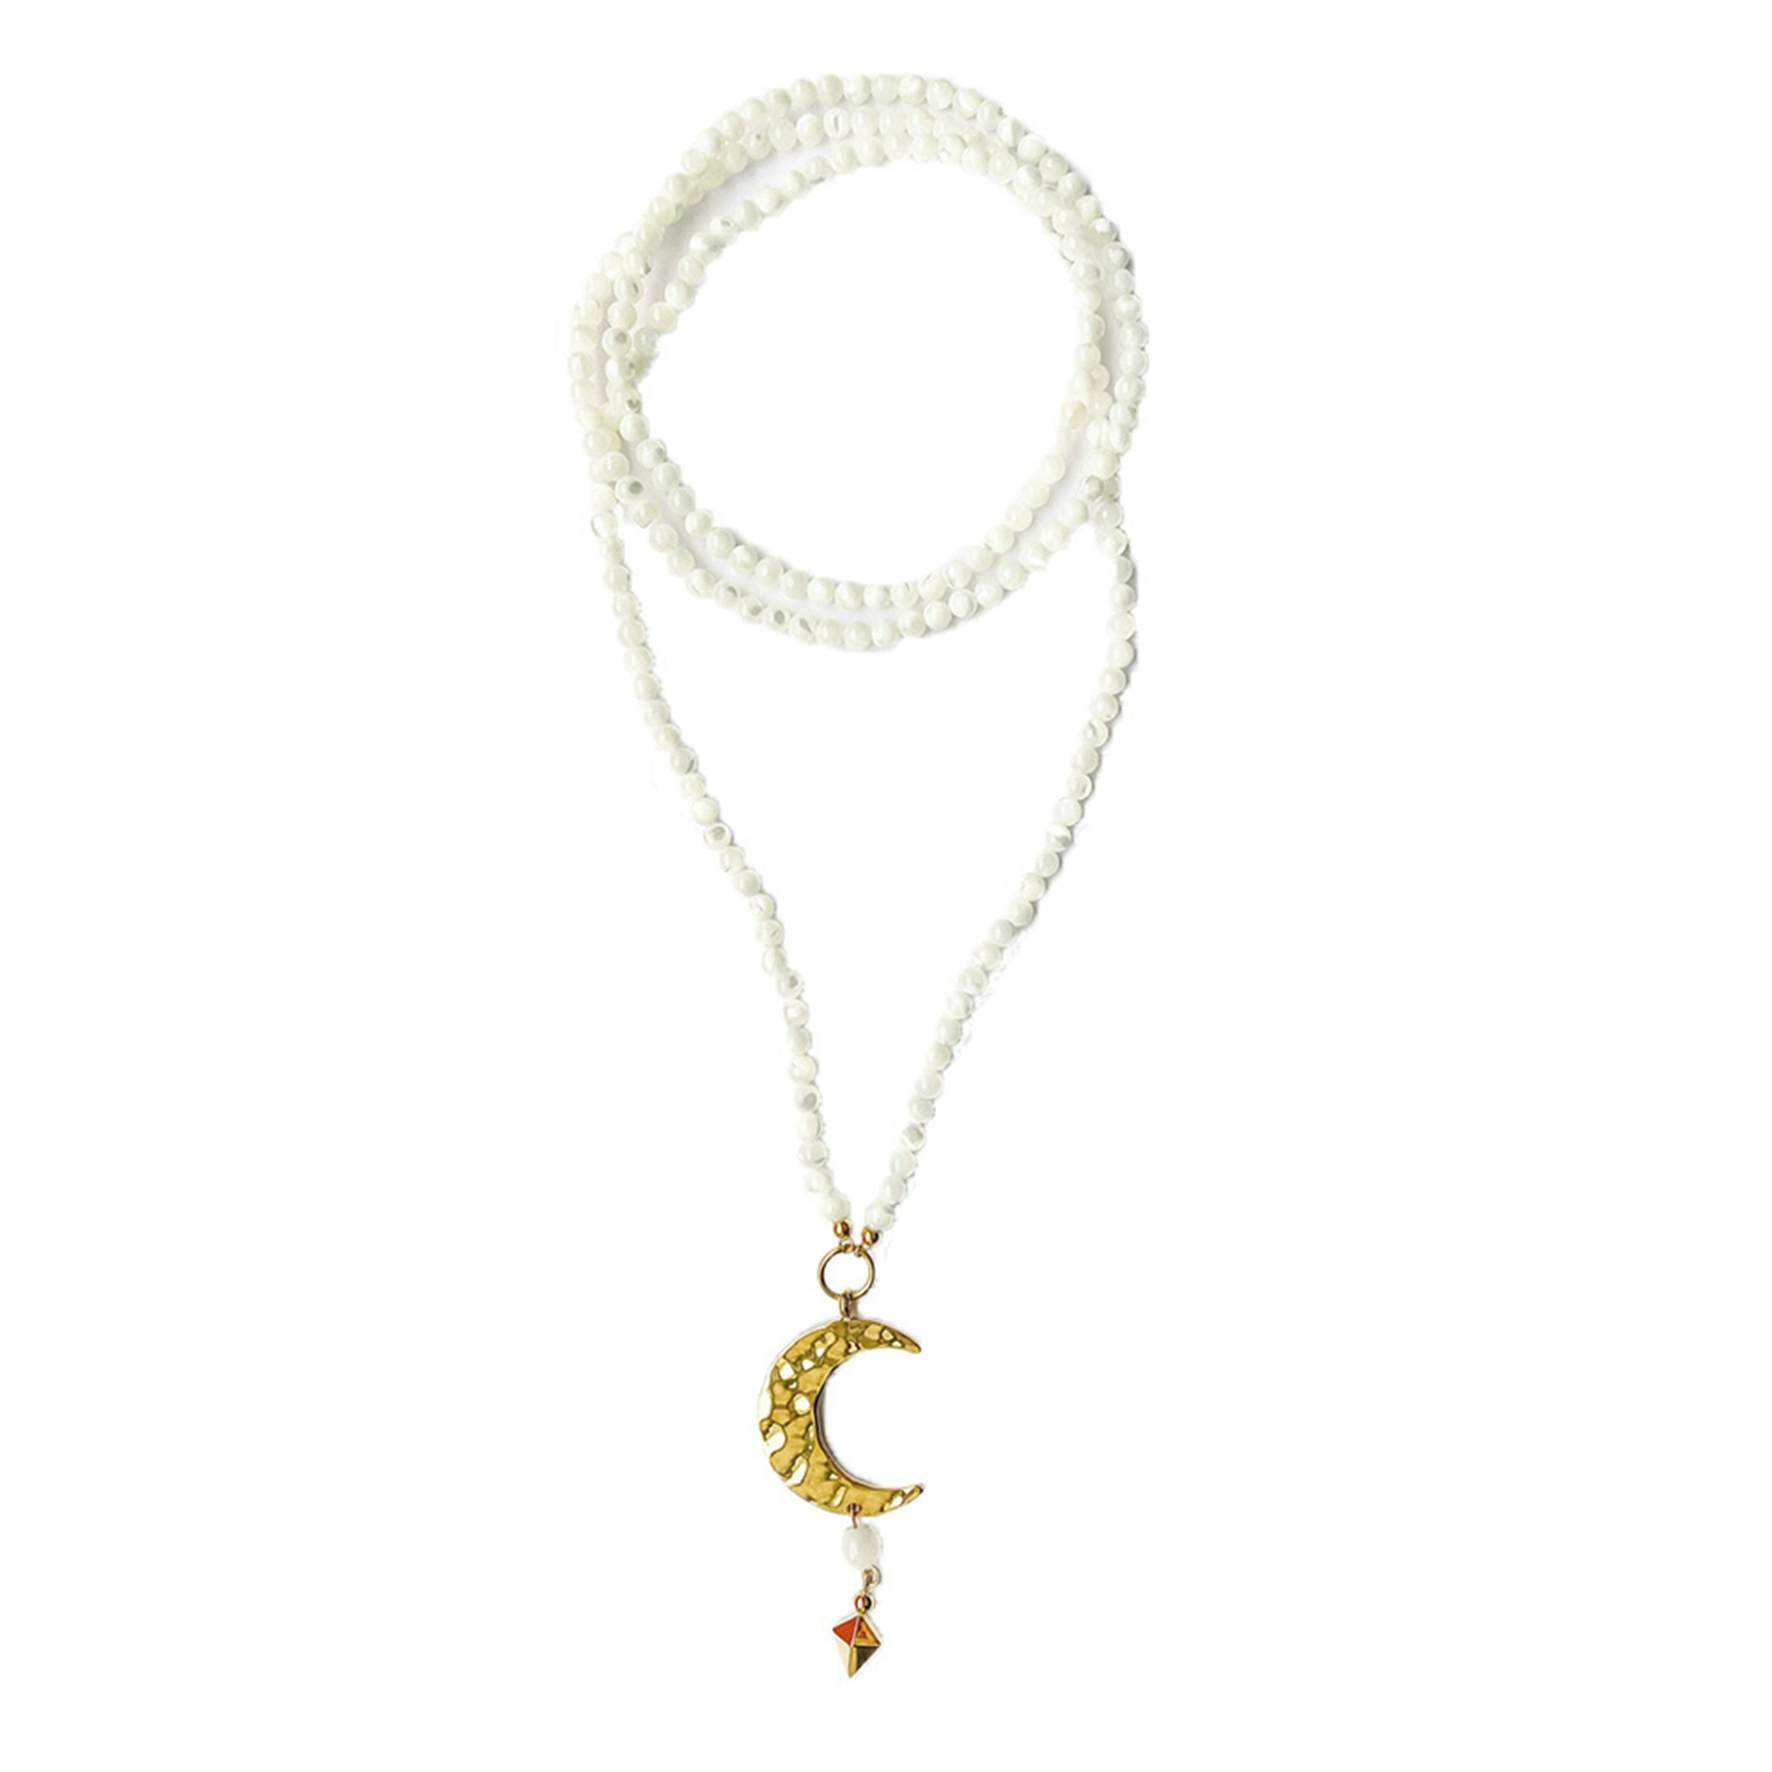 Mie Moltke Necklace With Marble Pearls